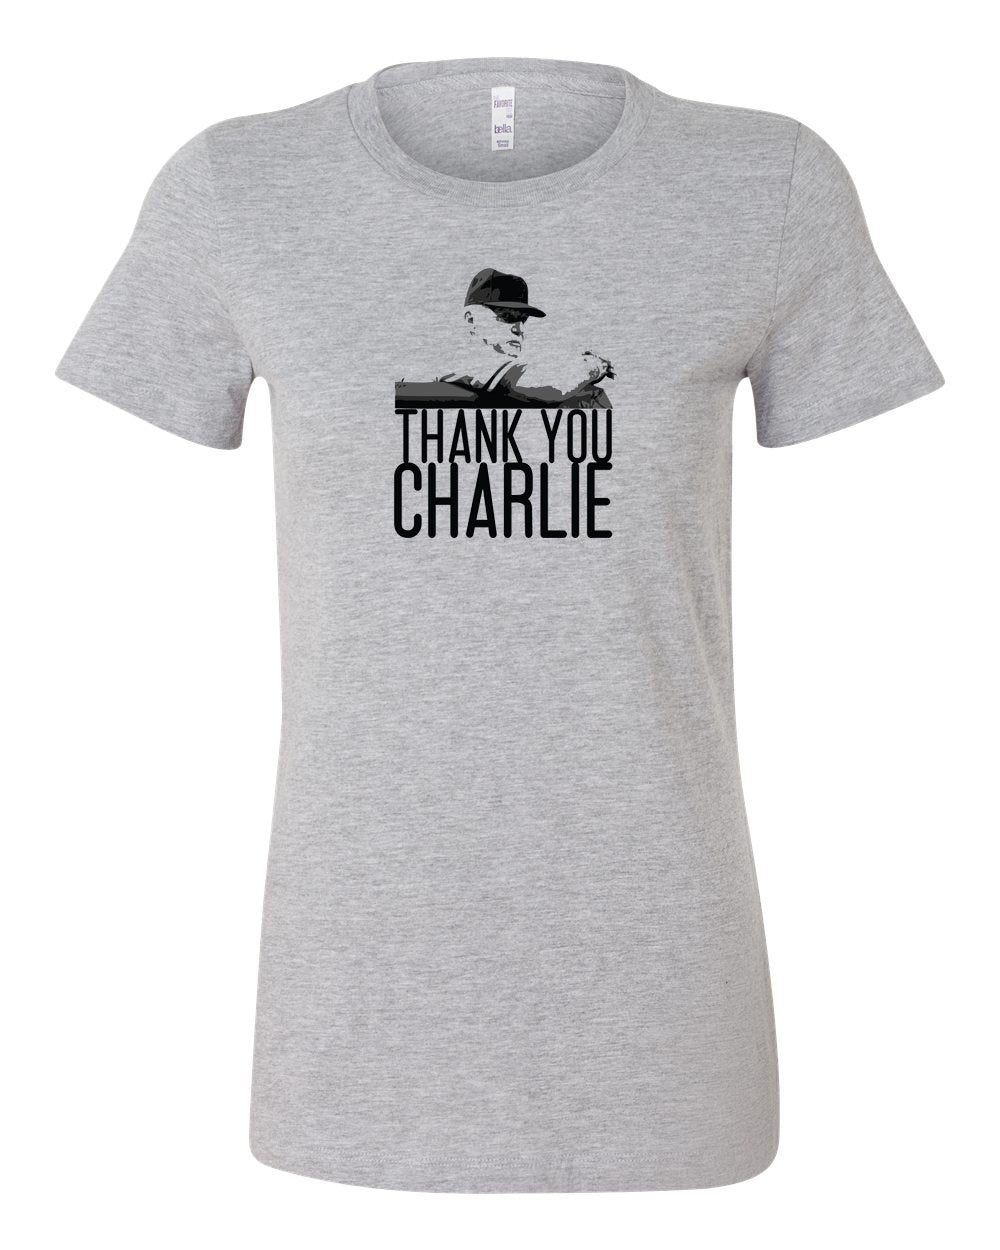 Thank You Charlie LADIES Junior-Fit T-Shirt